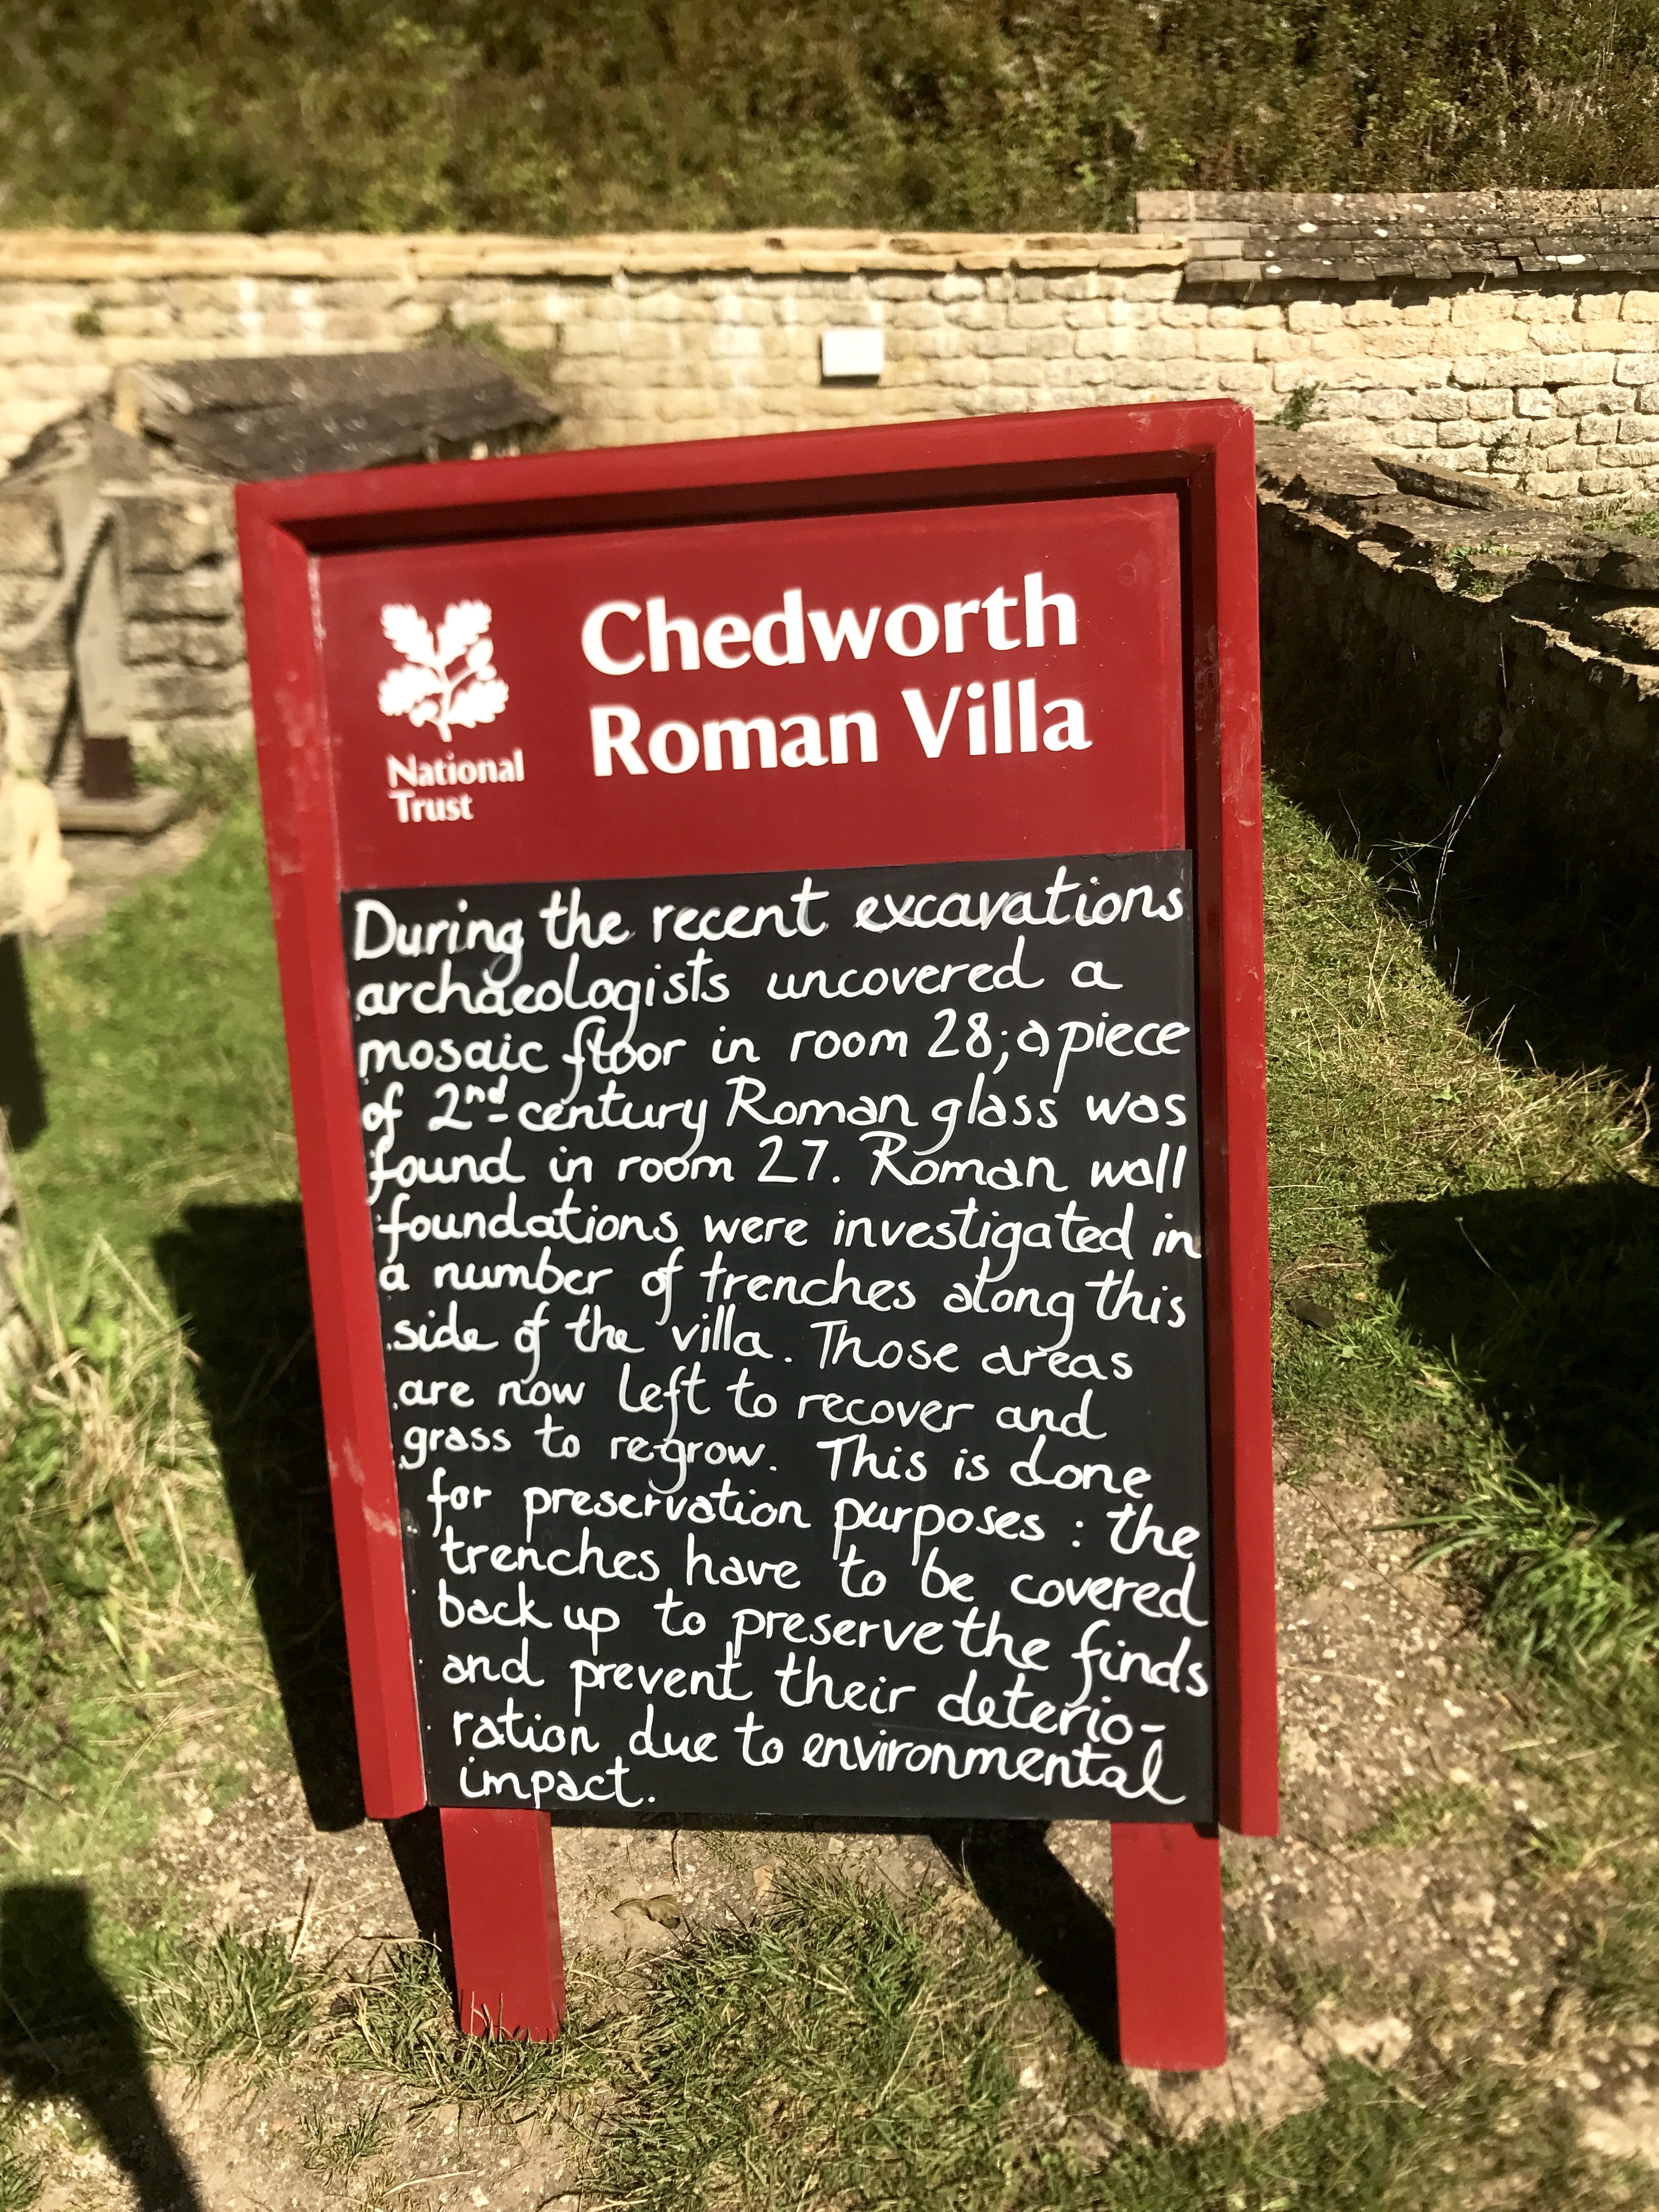 A visit to Chedworth Roman Villa National Trust property near